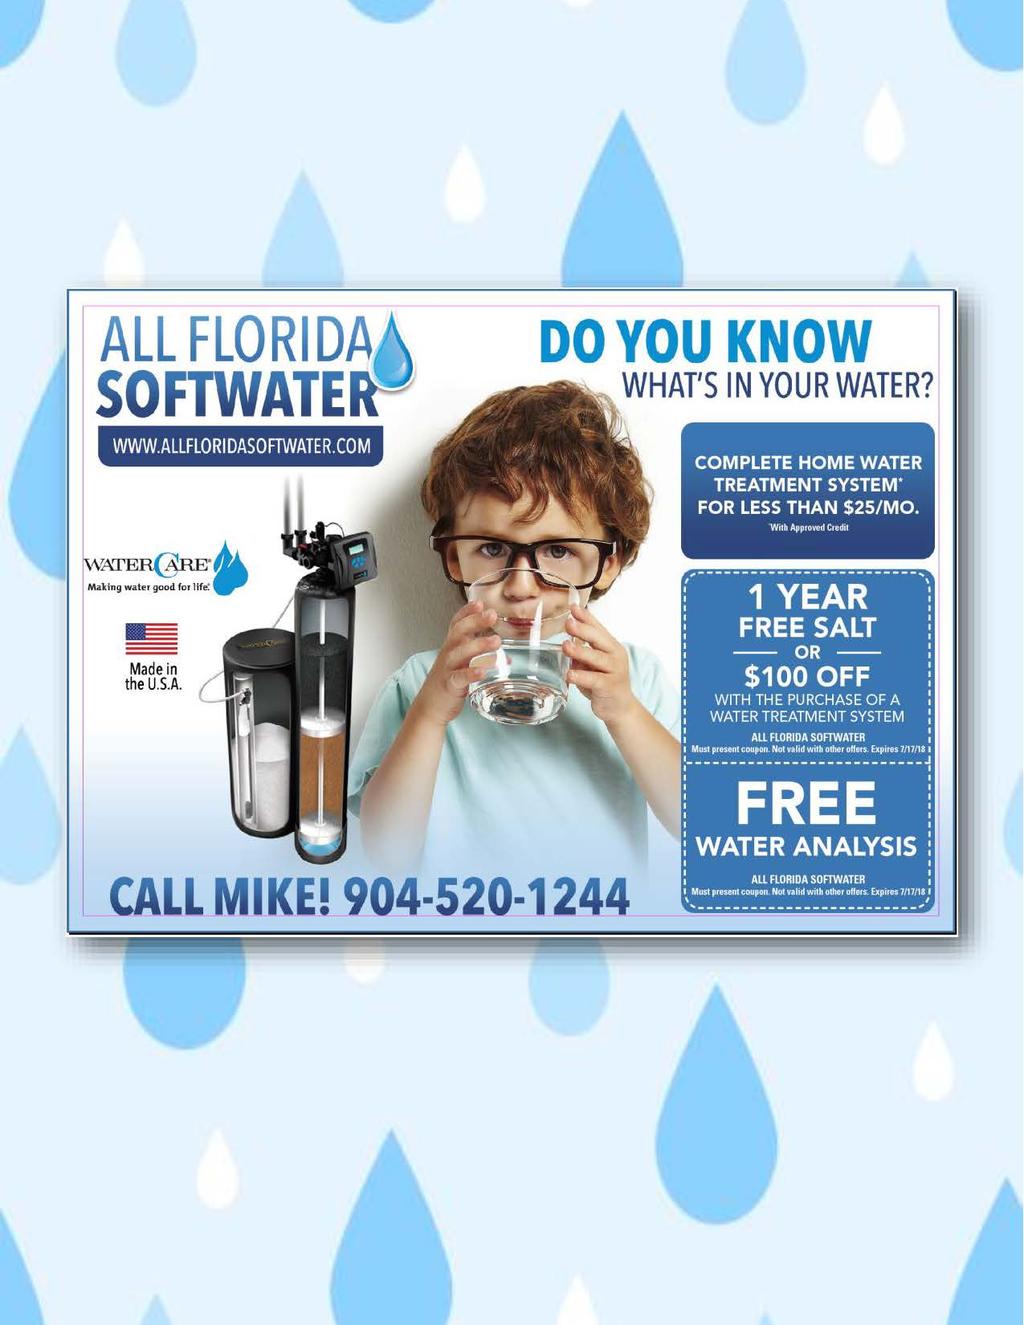 ALL FLORIDA SOFTWATE~ WWW.ALLFLORIDASOFTWATER.COM -= - Made in the U.S.A. DO YOU KNOW 1 WHAT'S IN YOUR WATER? COMPLETE HOME WATER TREATMENT SYSTEM* FOR LESS THAN $25/ MO.